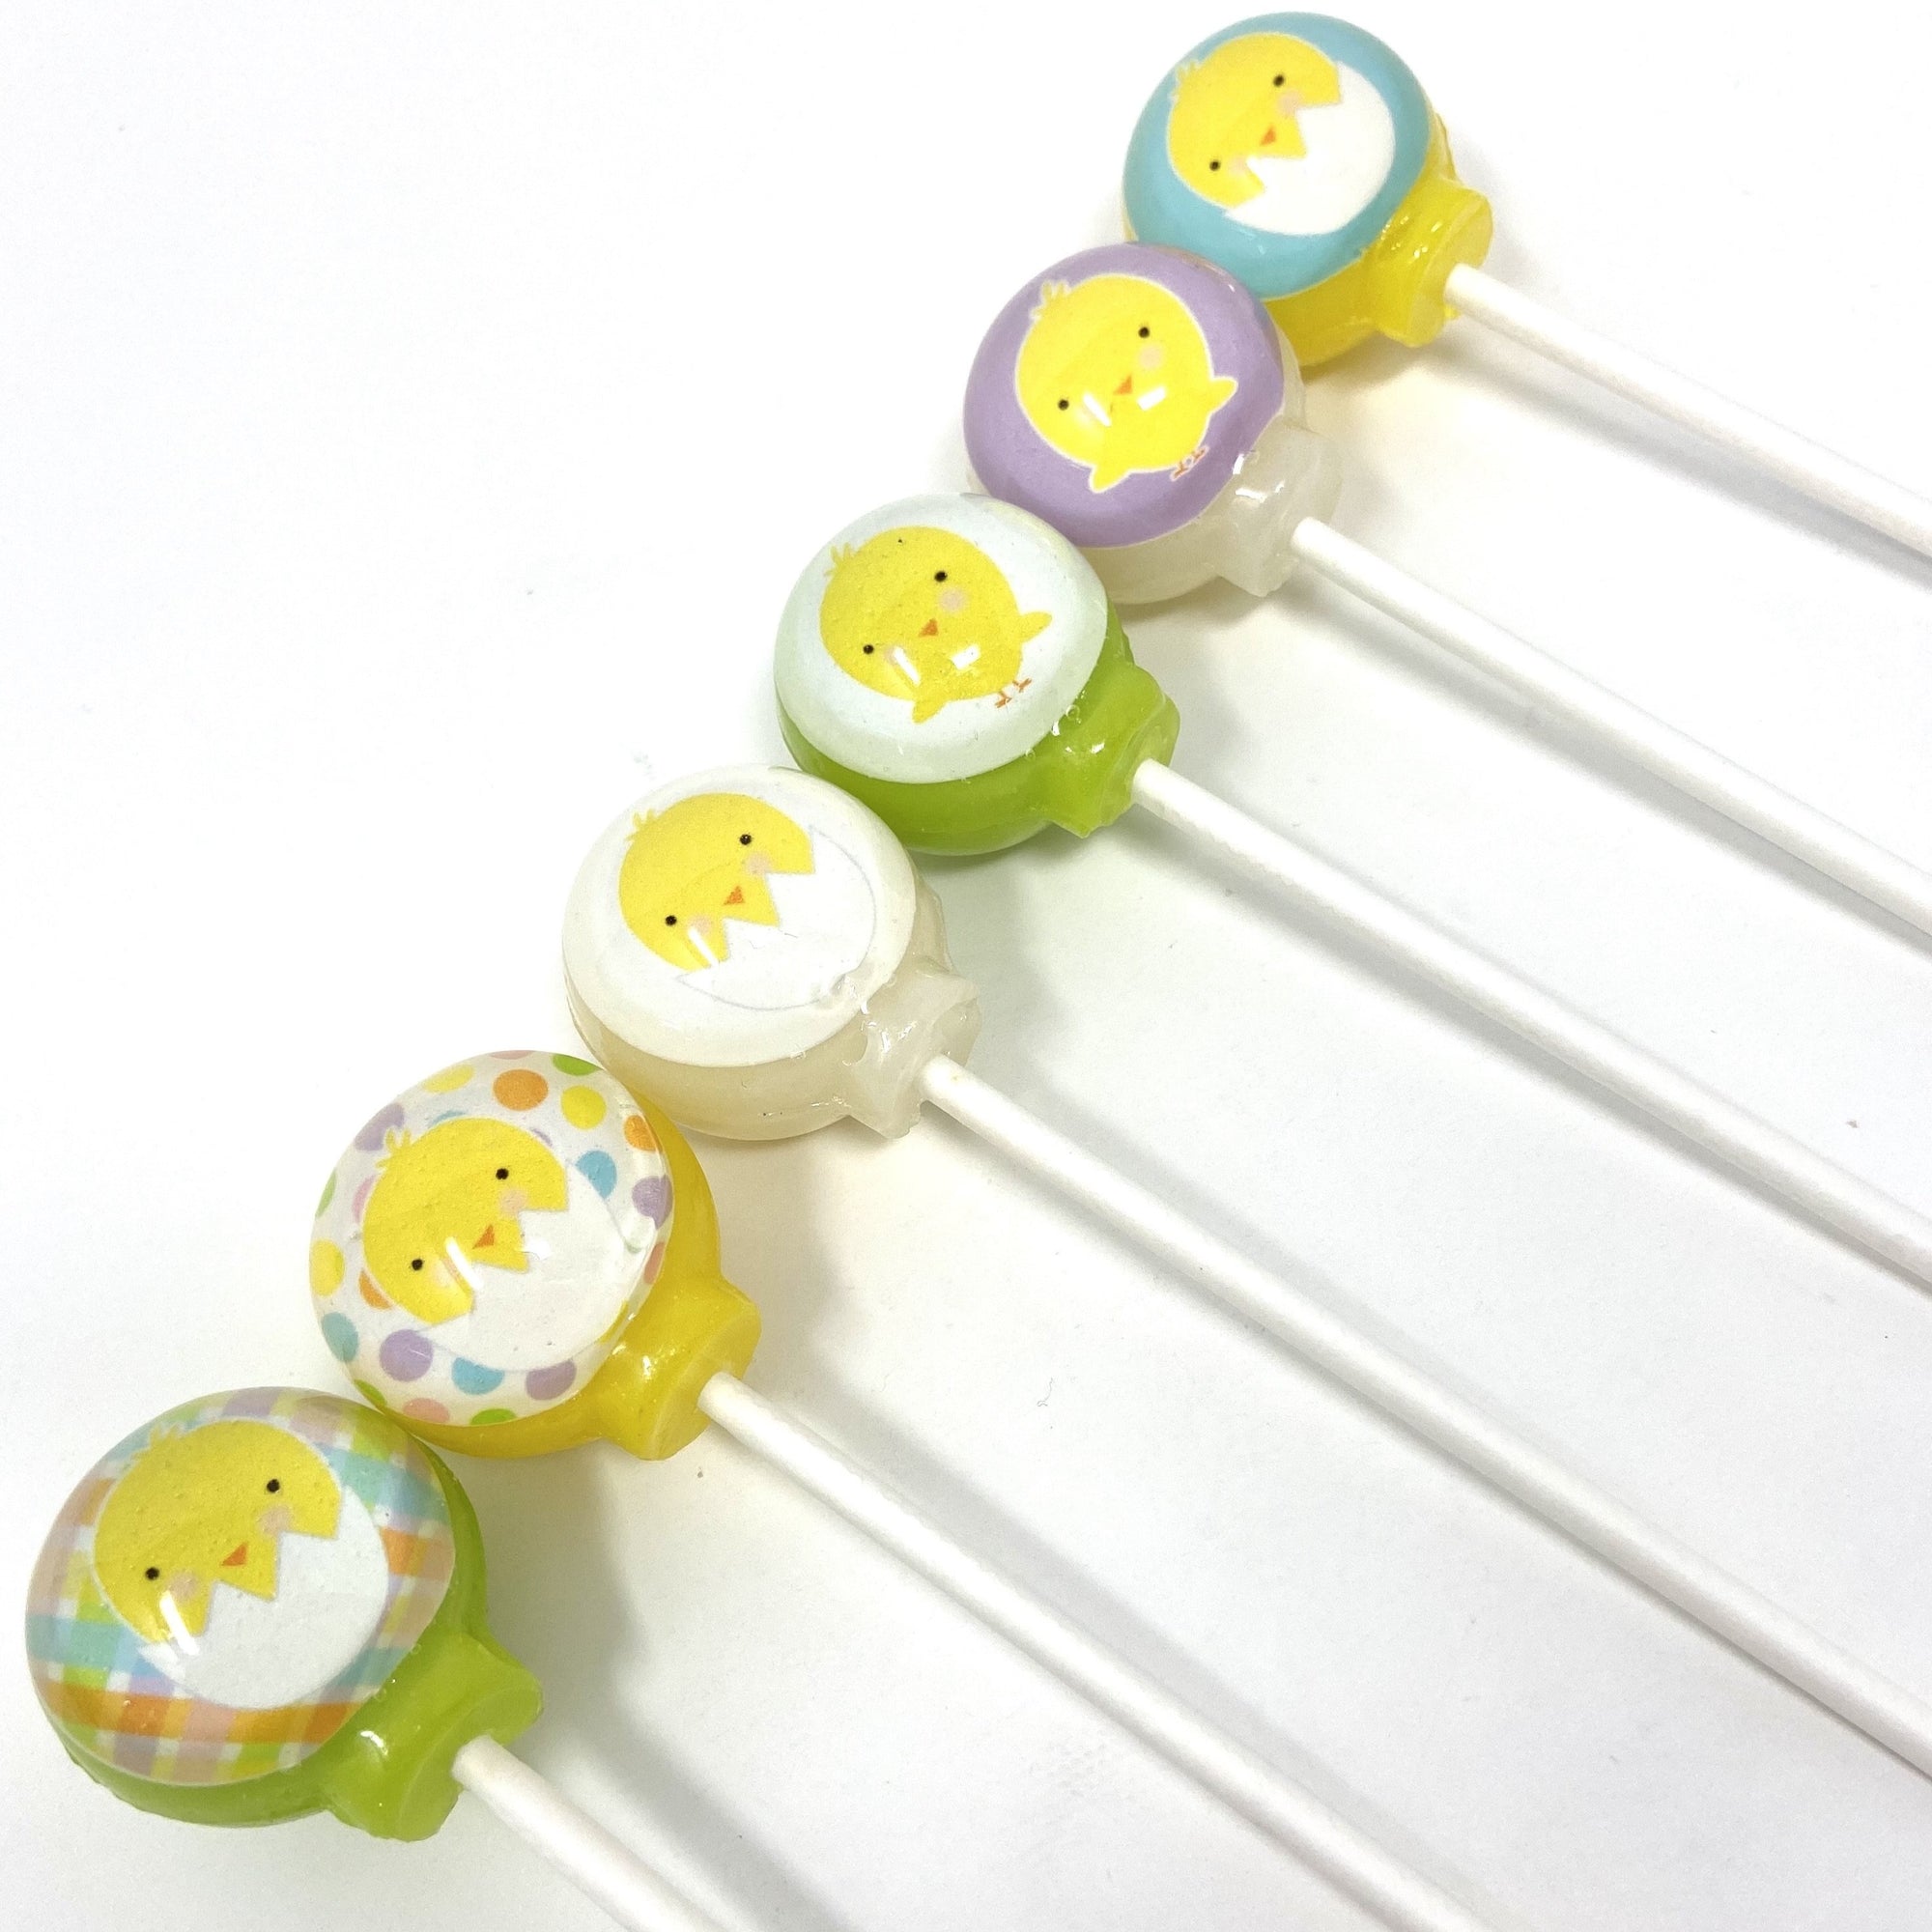 Baby Chick Lollipops 6-piece set by I Want Candy!